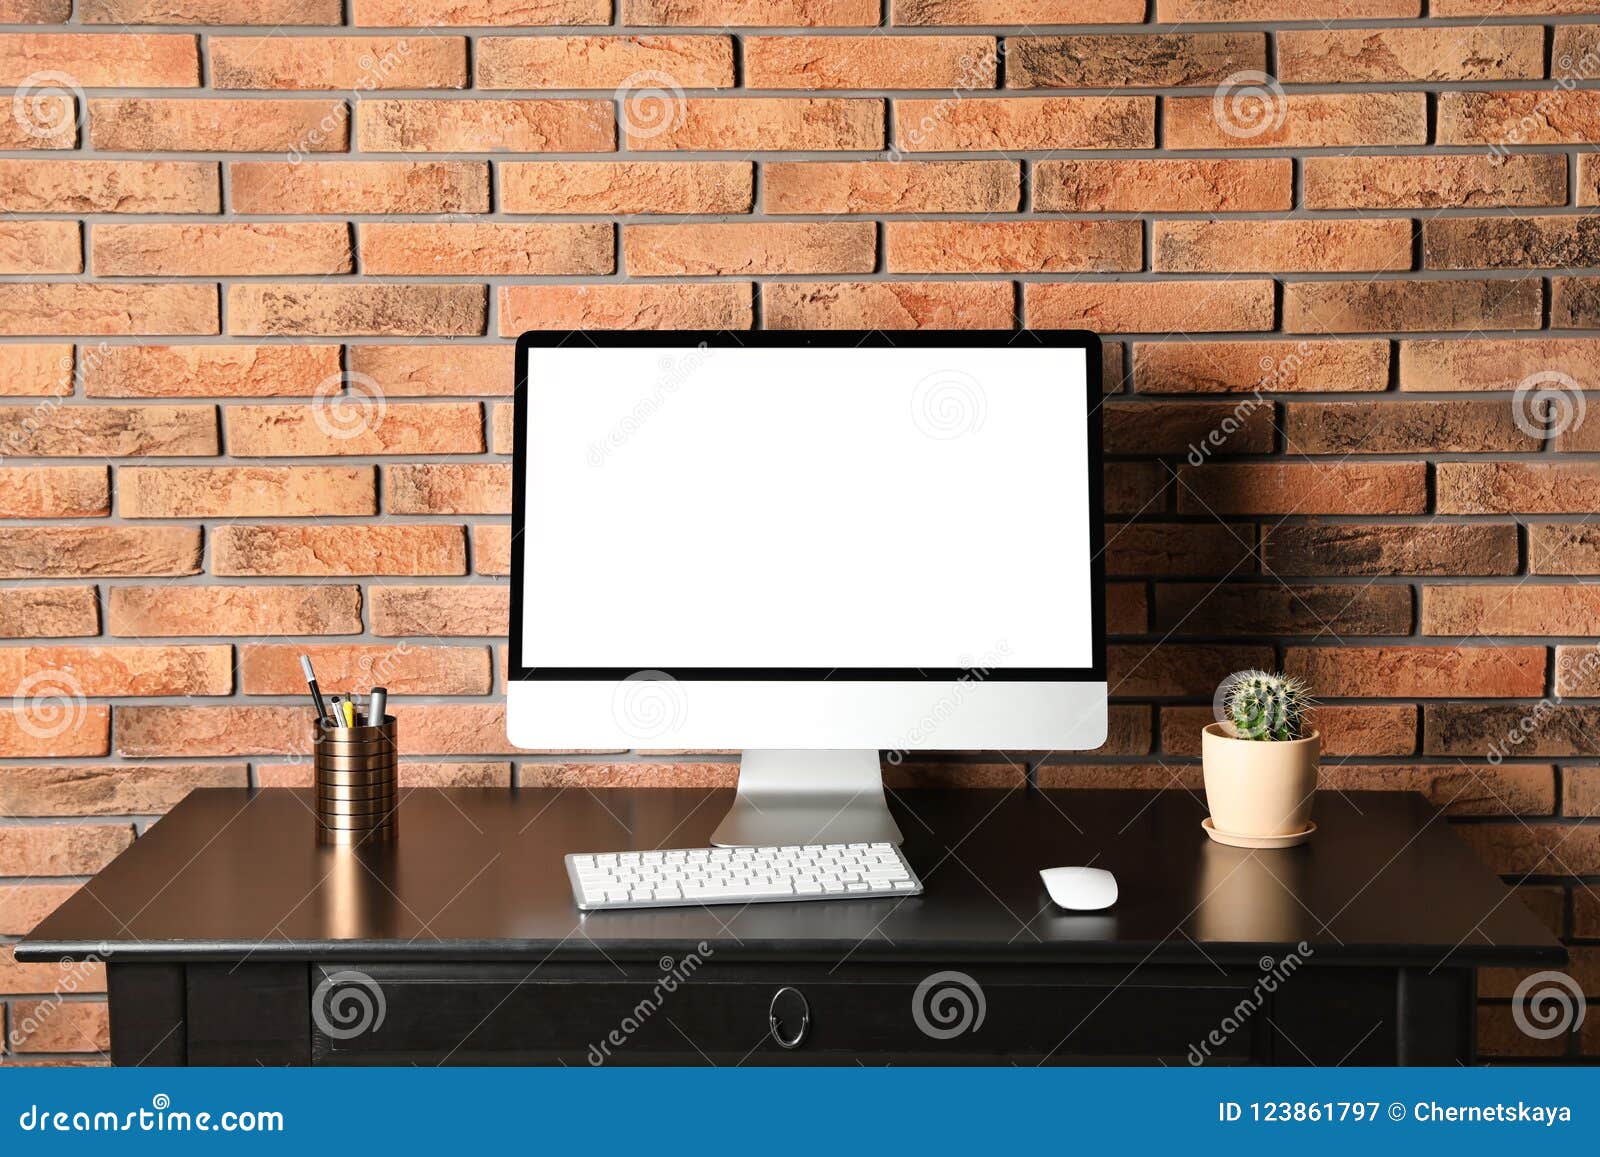 Modern Computer Monitor On Desk Brick Wall Mock Up With Space For